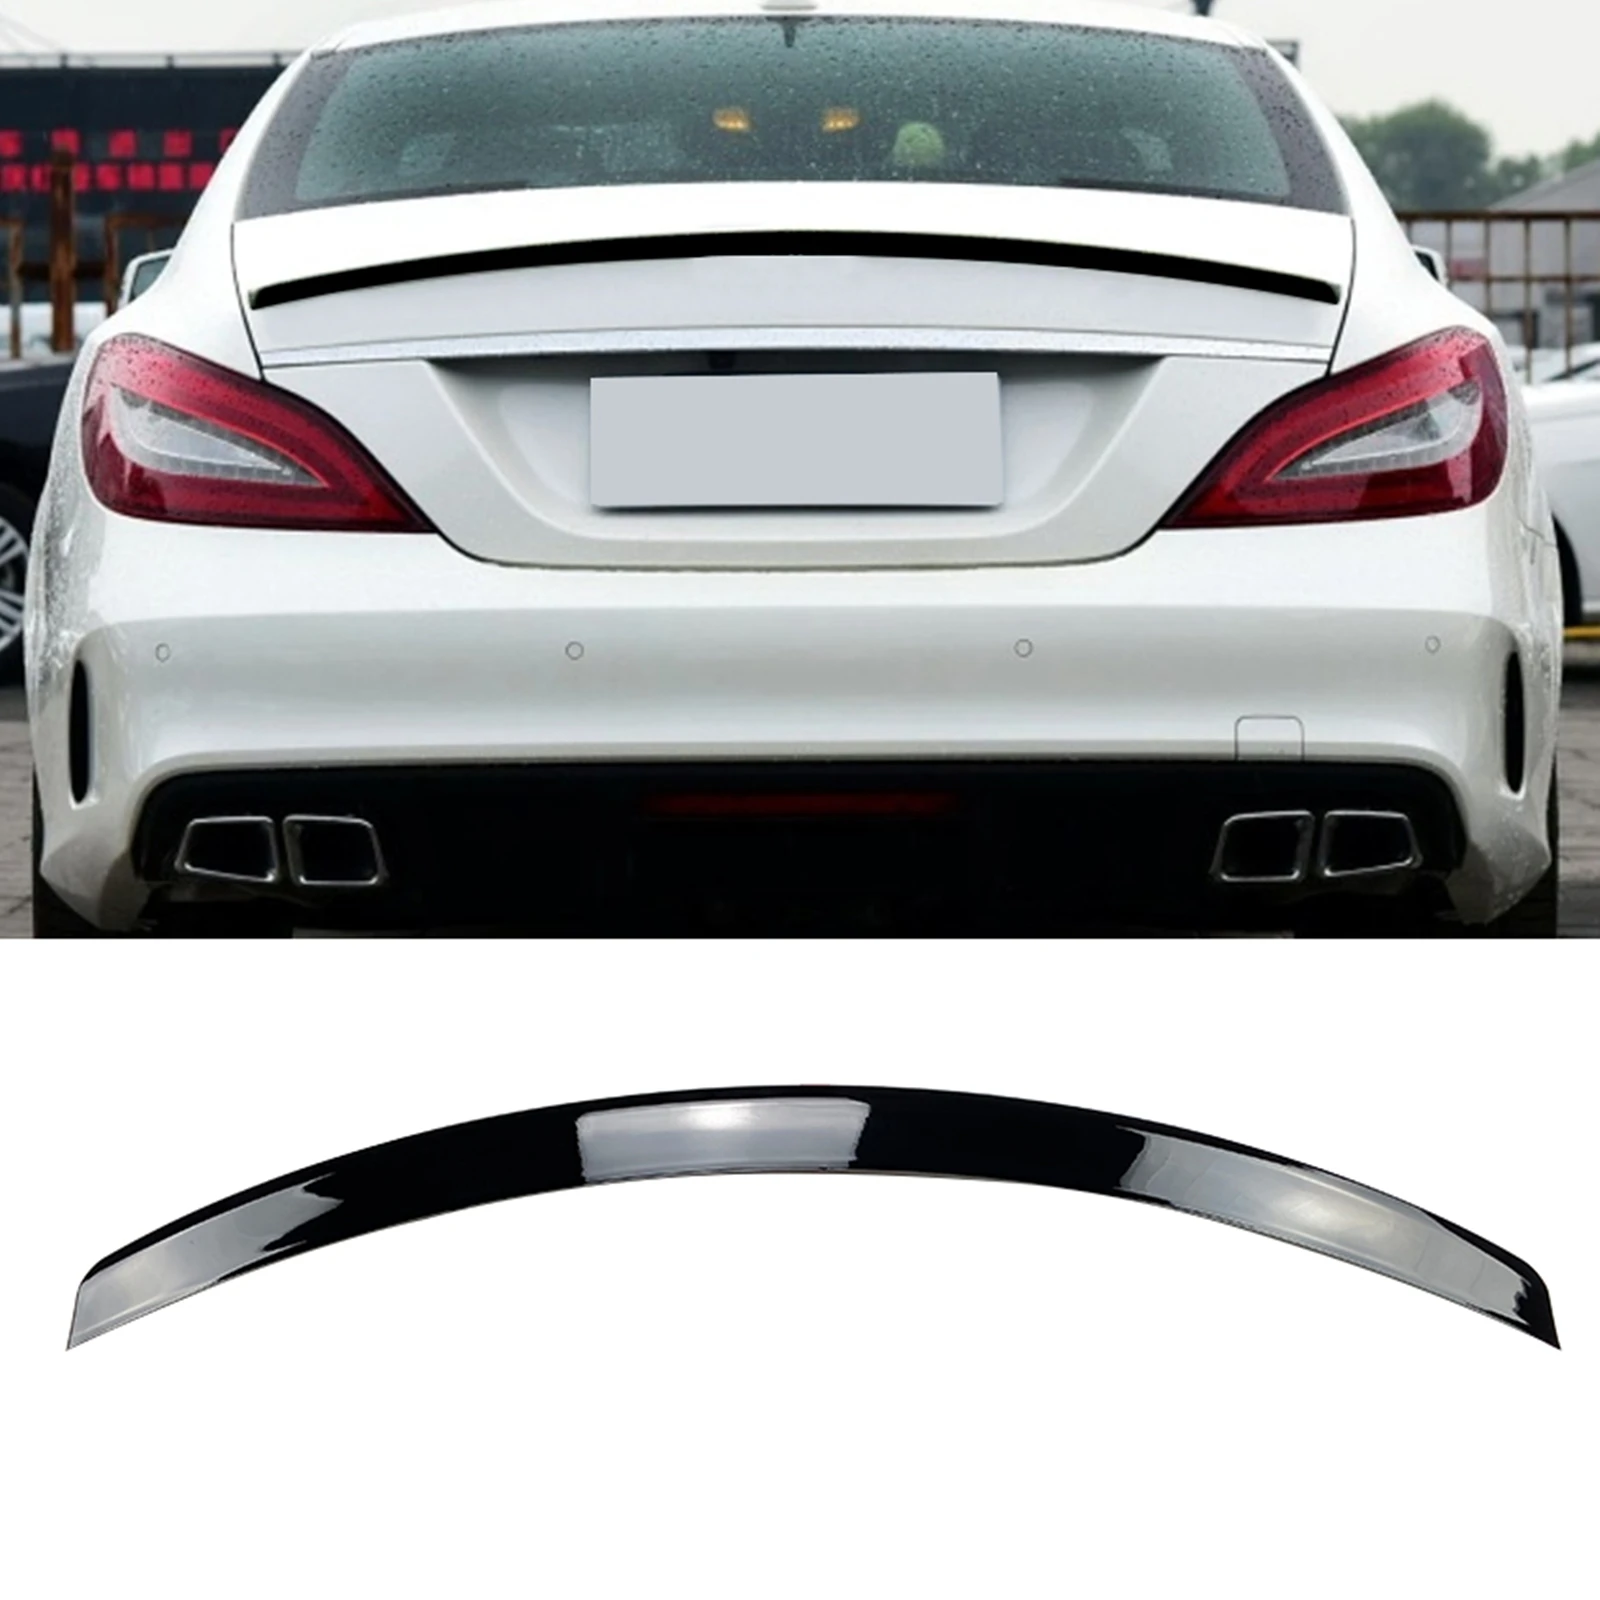 

Car Rear Trunk Spoiler Wing Tailgate Lid Splitter Decklid Lip Auto Kit For Mercedes Benz CLS Class C218 CLS260 300 AMG 2011-2017